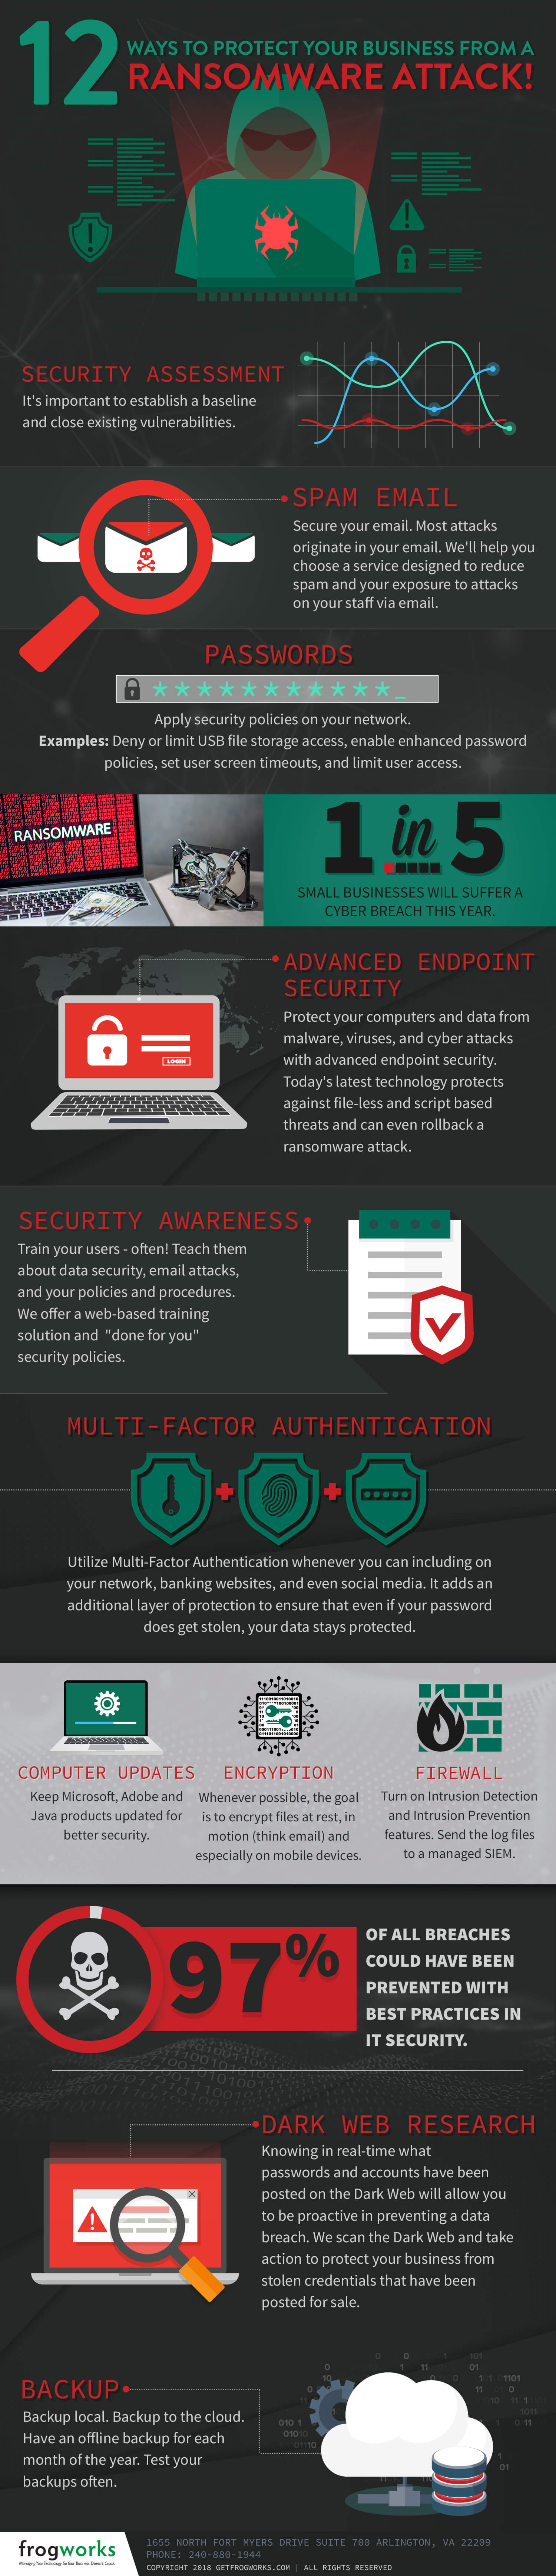 Ransomware_AttackIG-infographic